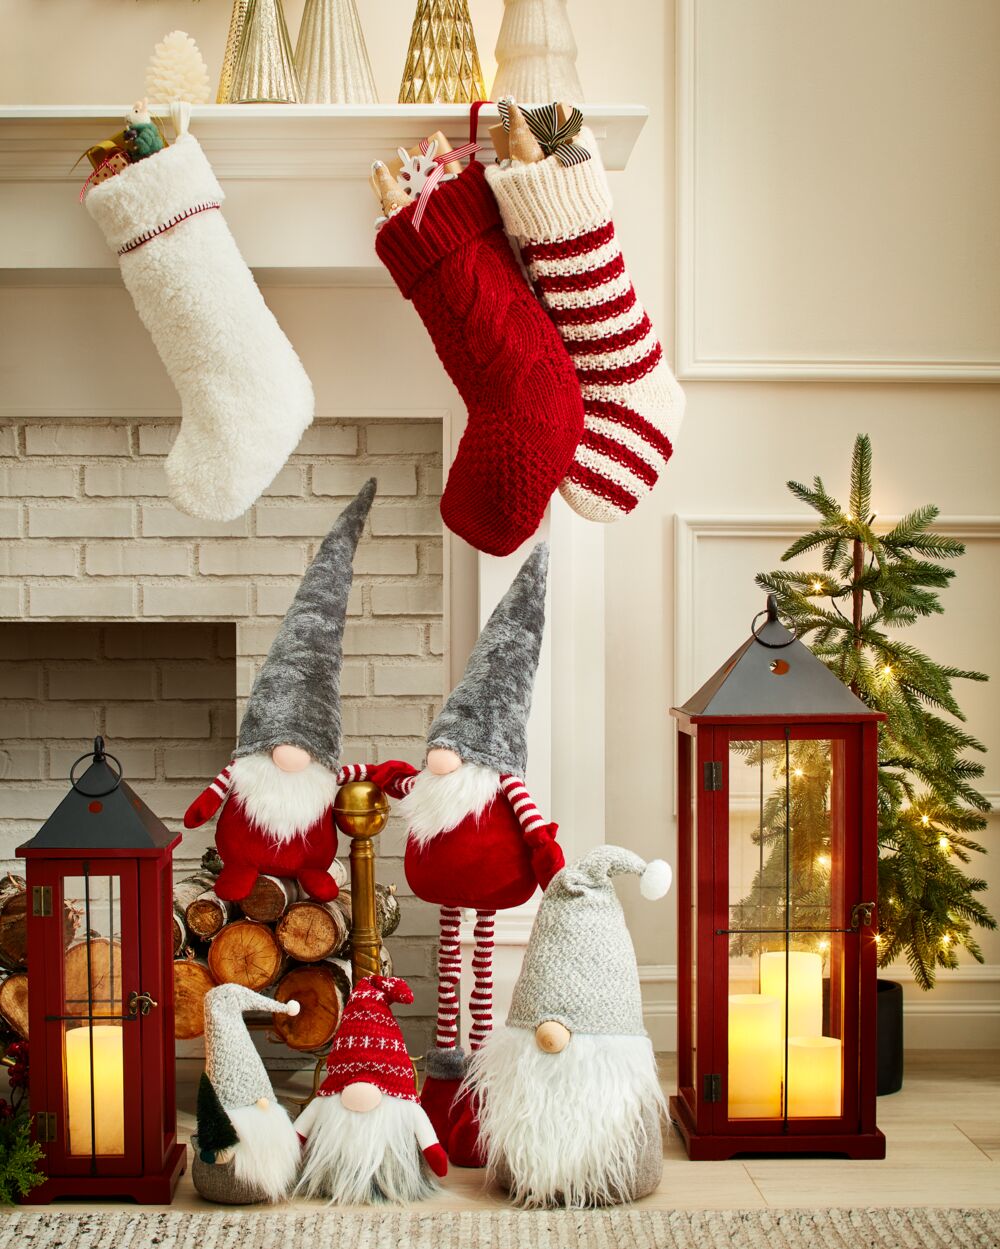 8 Holiday Decorating Ideas Around the House - Gluckstein Home